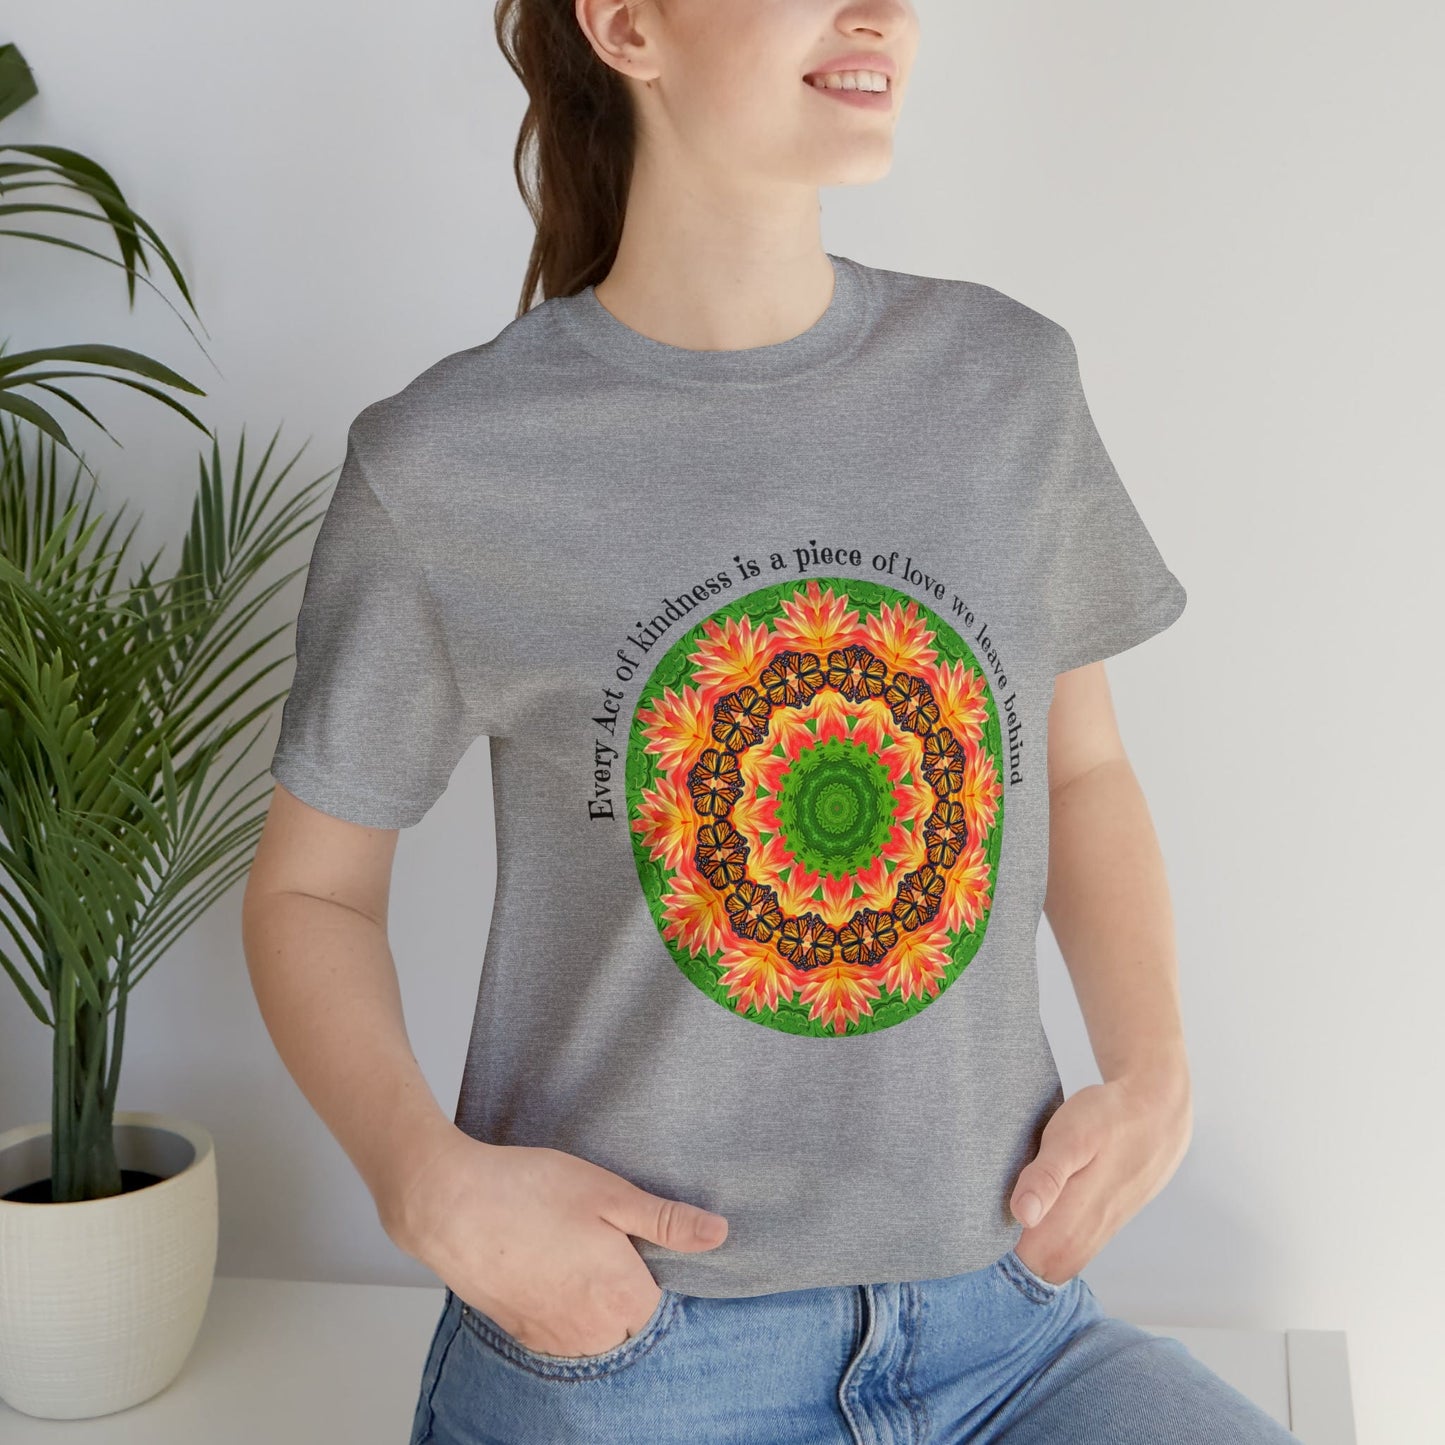 Beautiful Butterfly Mandala Art Graphic Tee Shirt - Cottagecore Clothing A Nature Lovers Delight Ornate Orbit athletic Heather